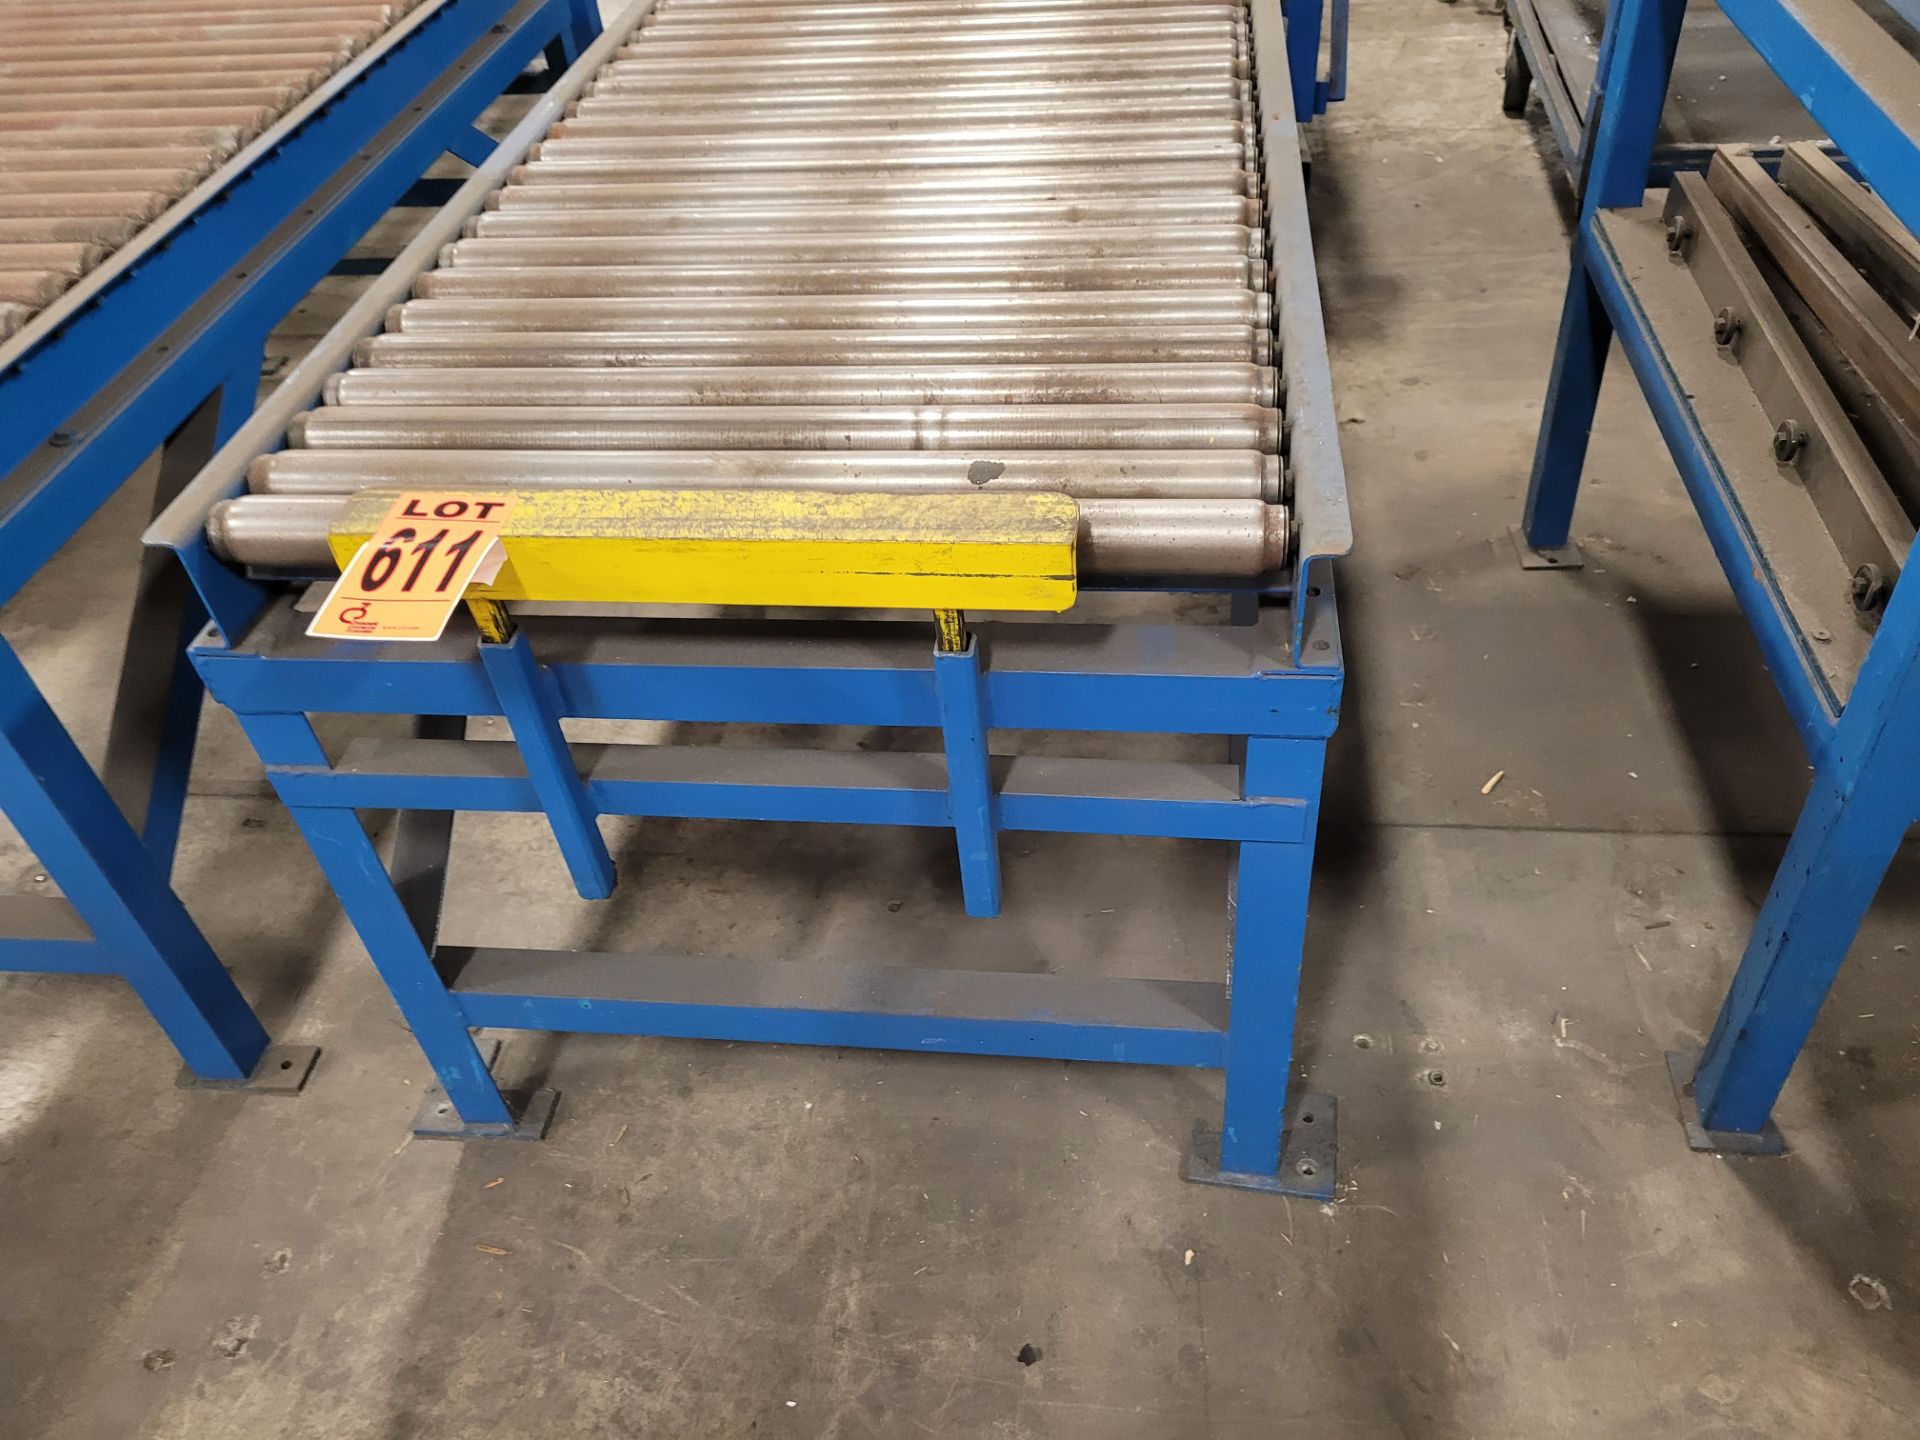 Lot of (2) Heavy-duty steel frame roller conveyors w/adjustable height backstops - Image 3 of 5